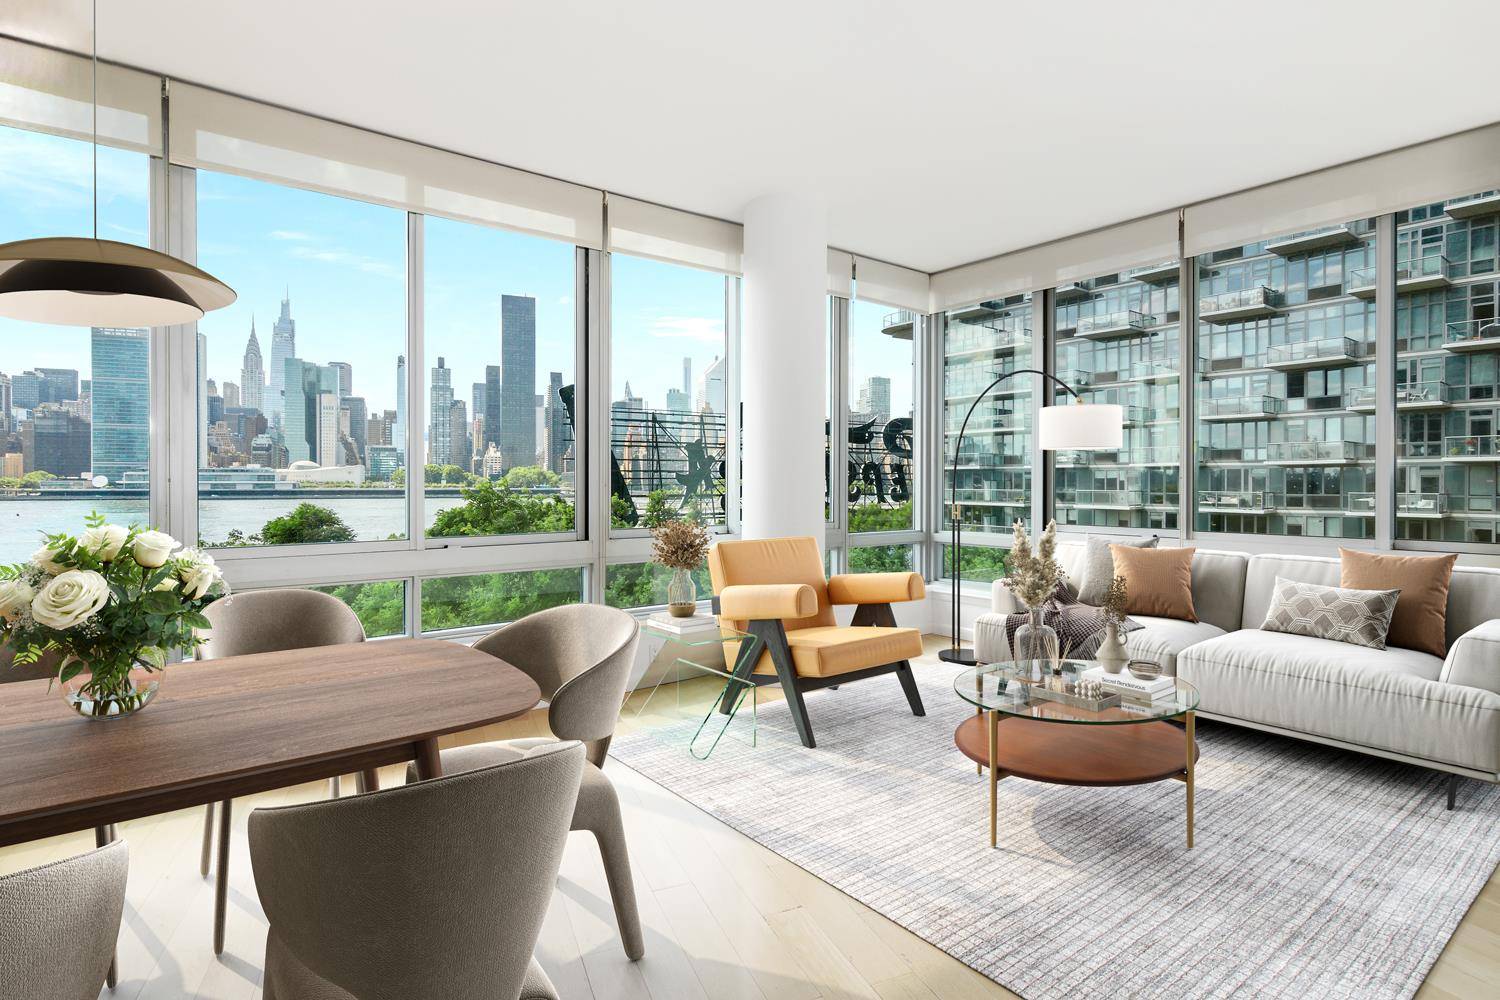 With floor to ceiling windows, you have amazing direct city views including the Empire State Building and Chrysler Building in this gorgeous 2 bed and 2 bath at the luxurious ...